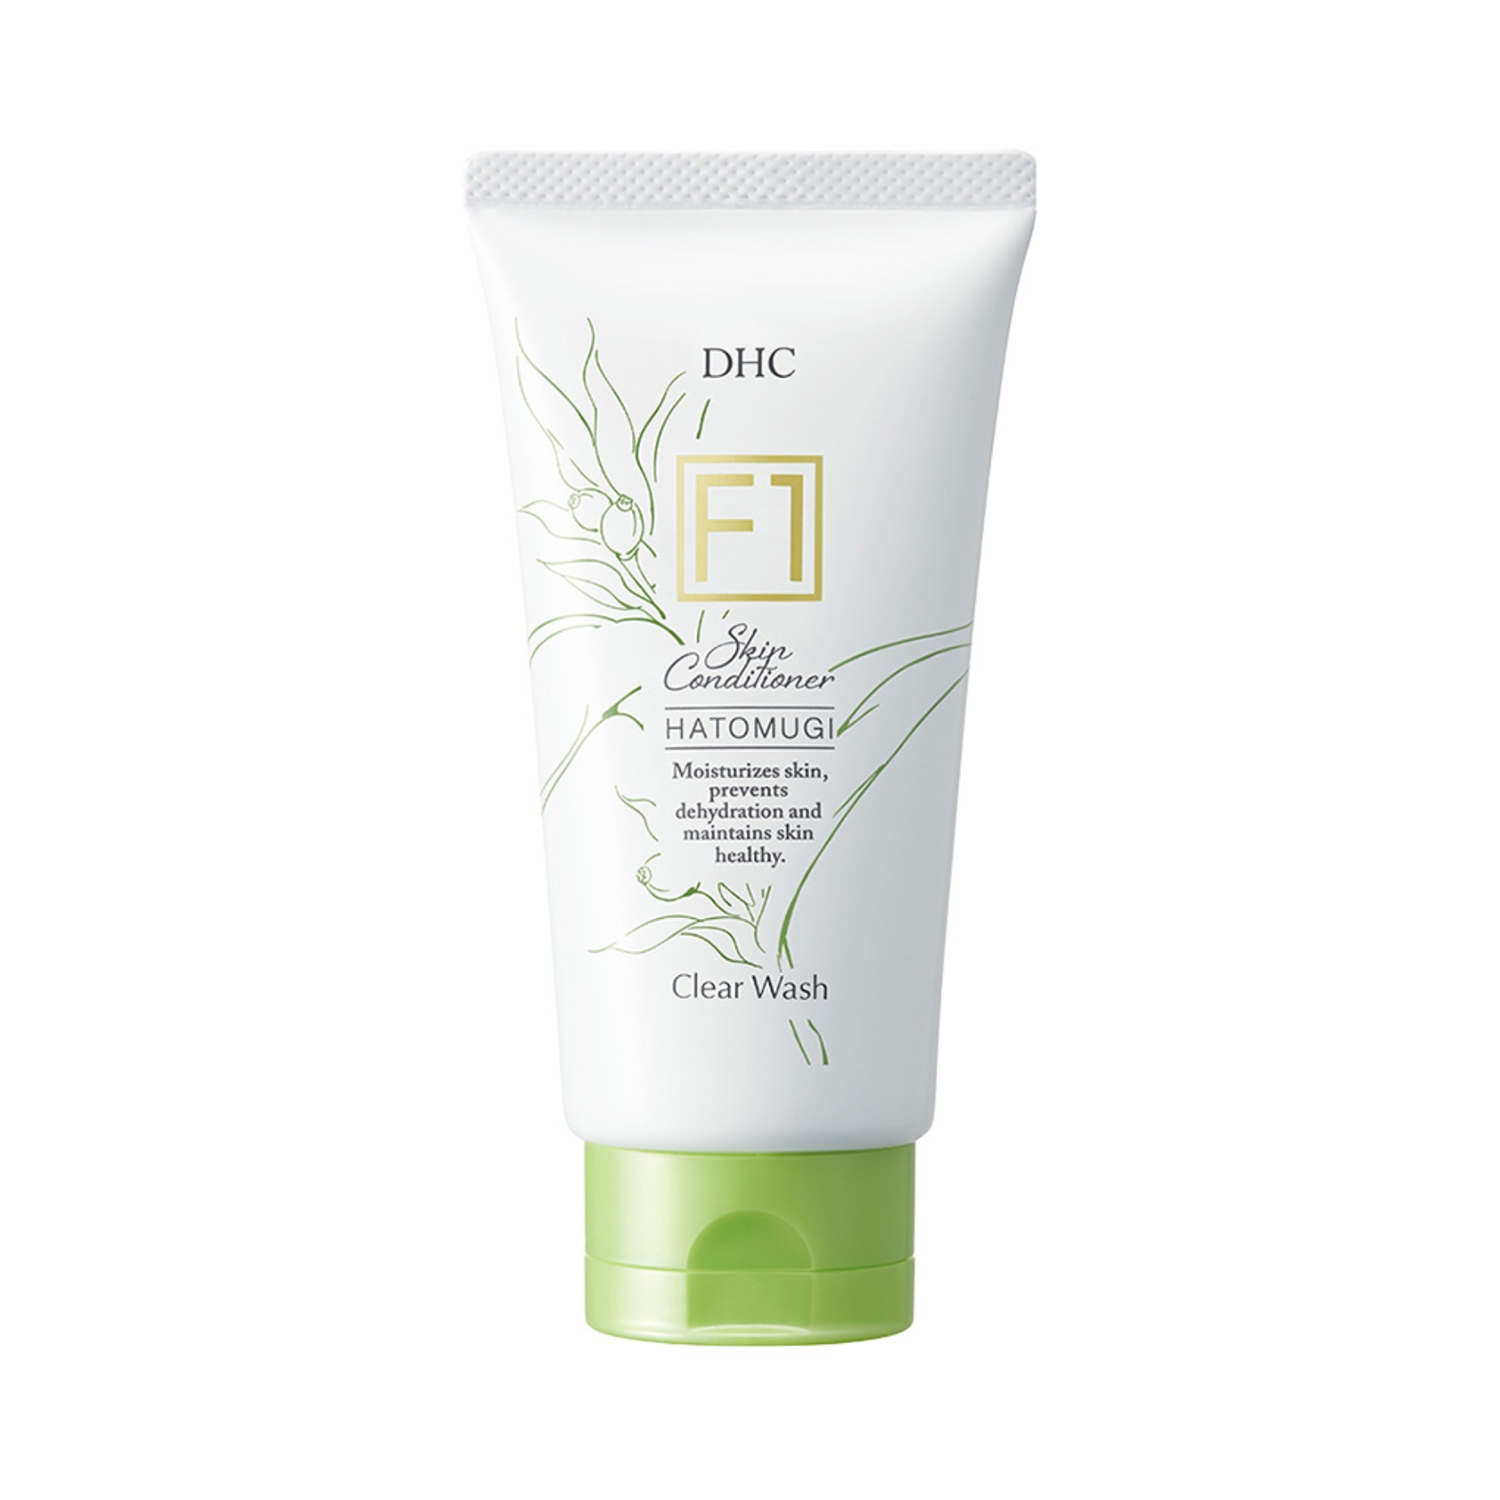 DHC | DHC Beauty Hatomugi Face Wash (100g)